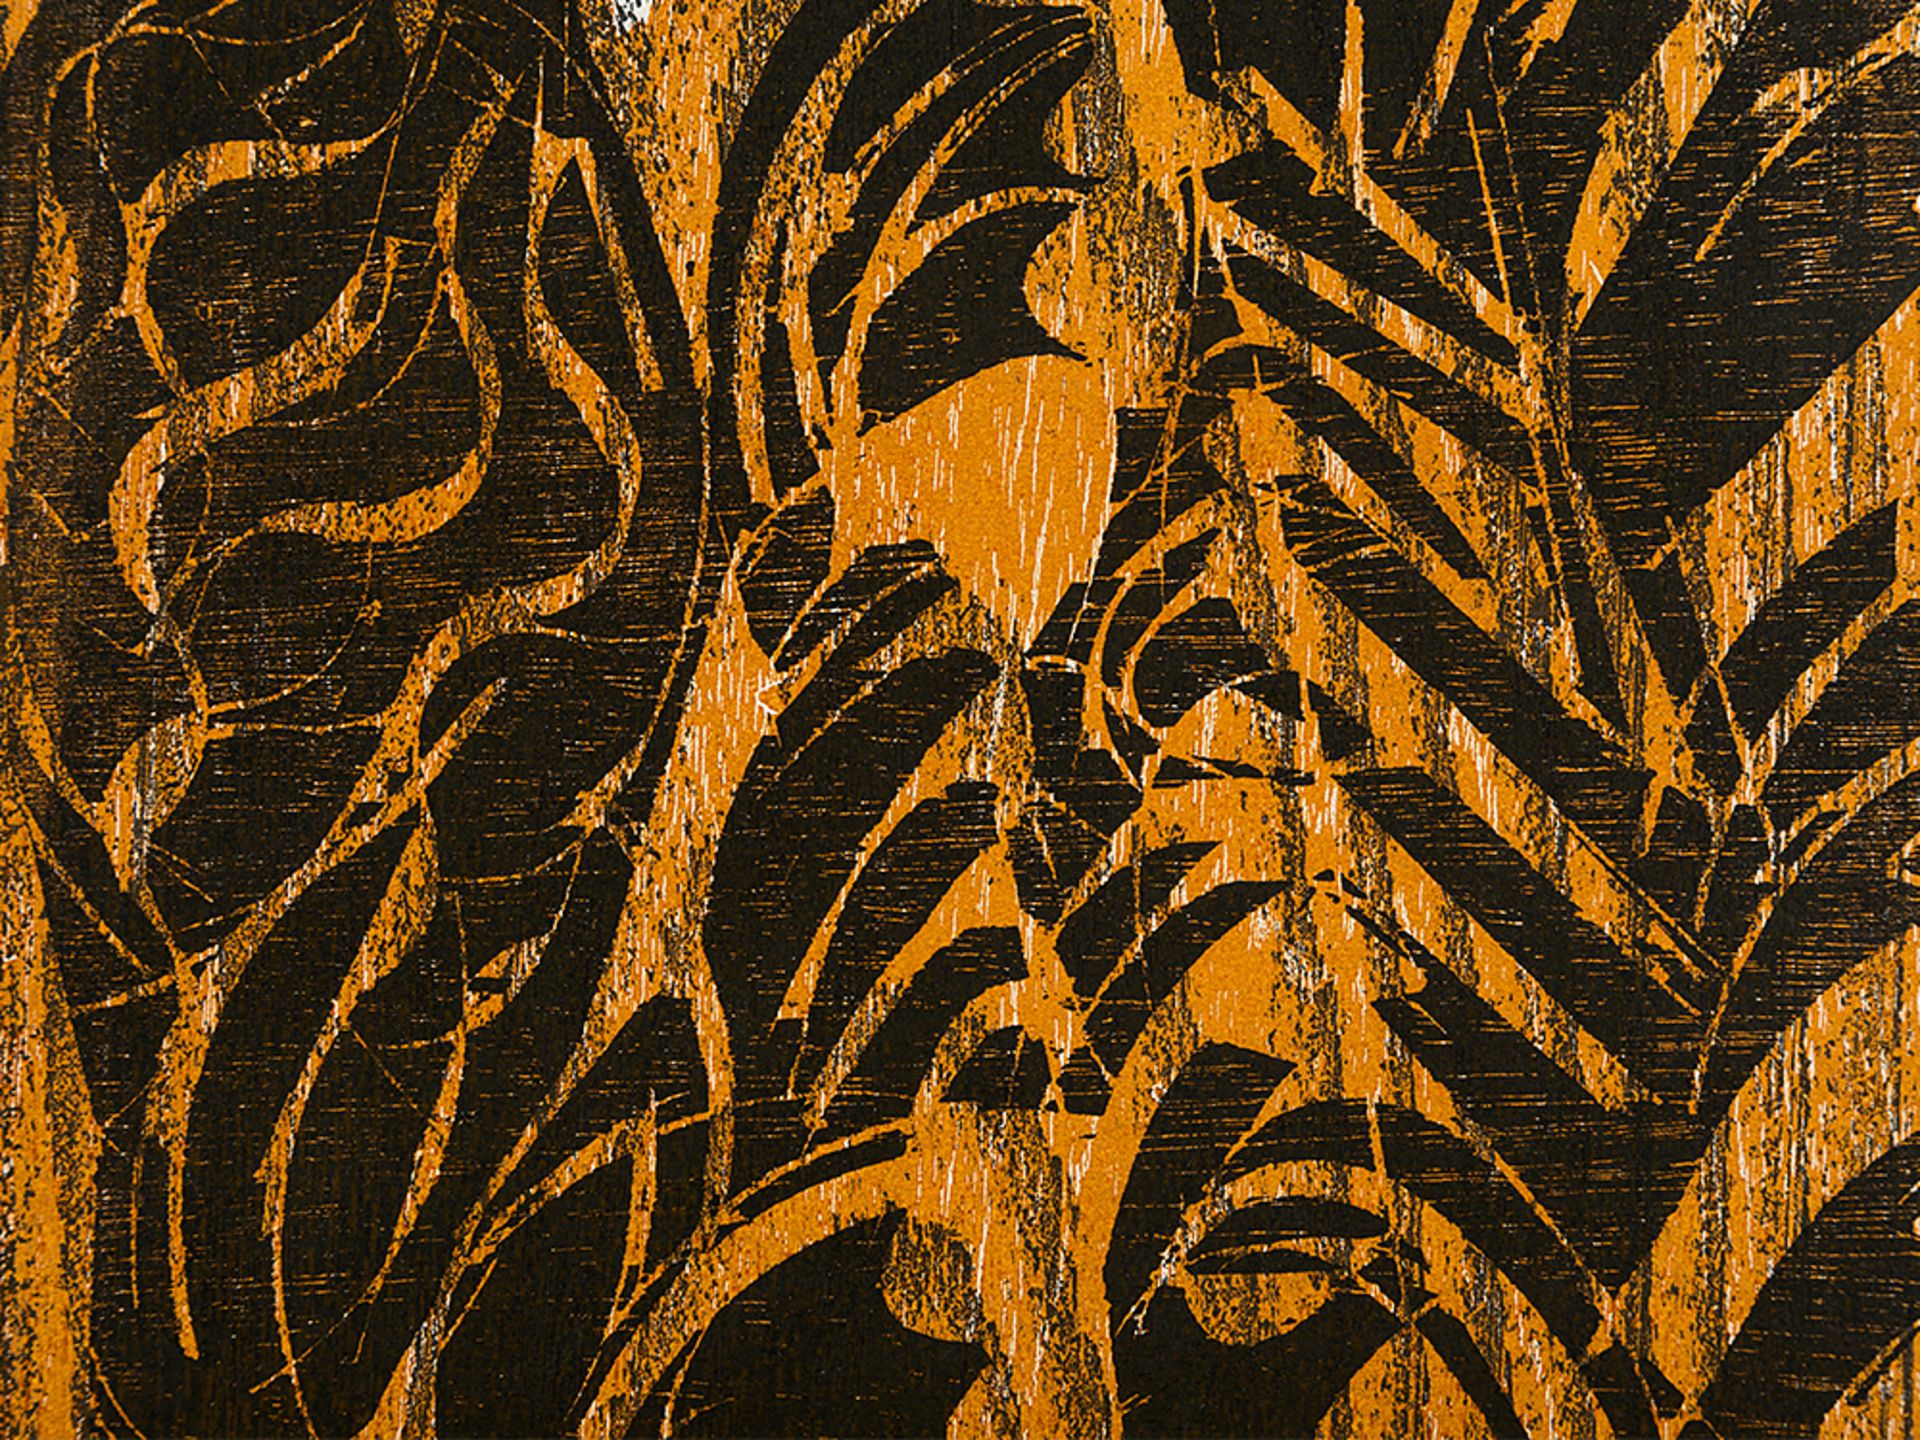 HAP Grieshaber, Steppengras, Woodcut in Colors, 1972 - Image 9 of 14